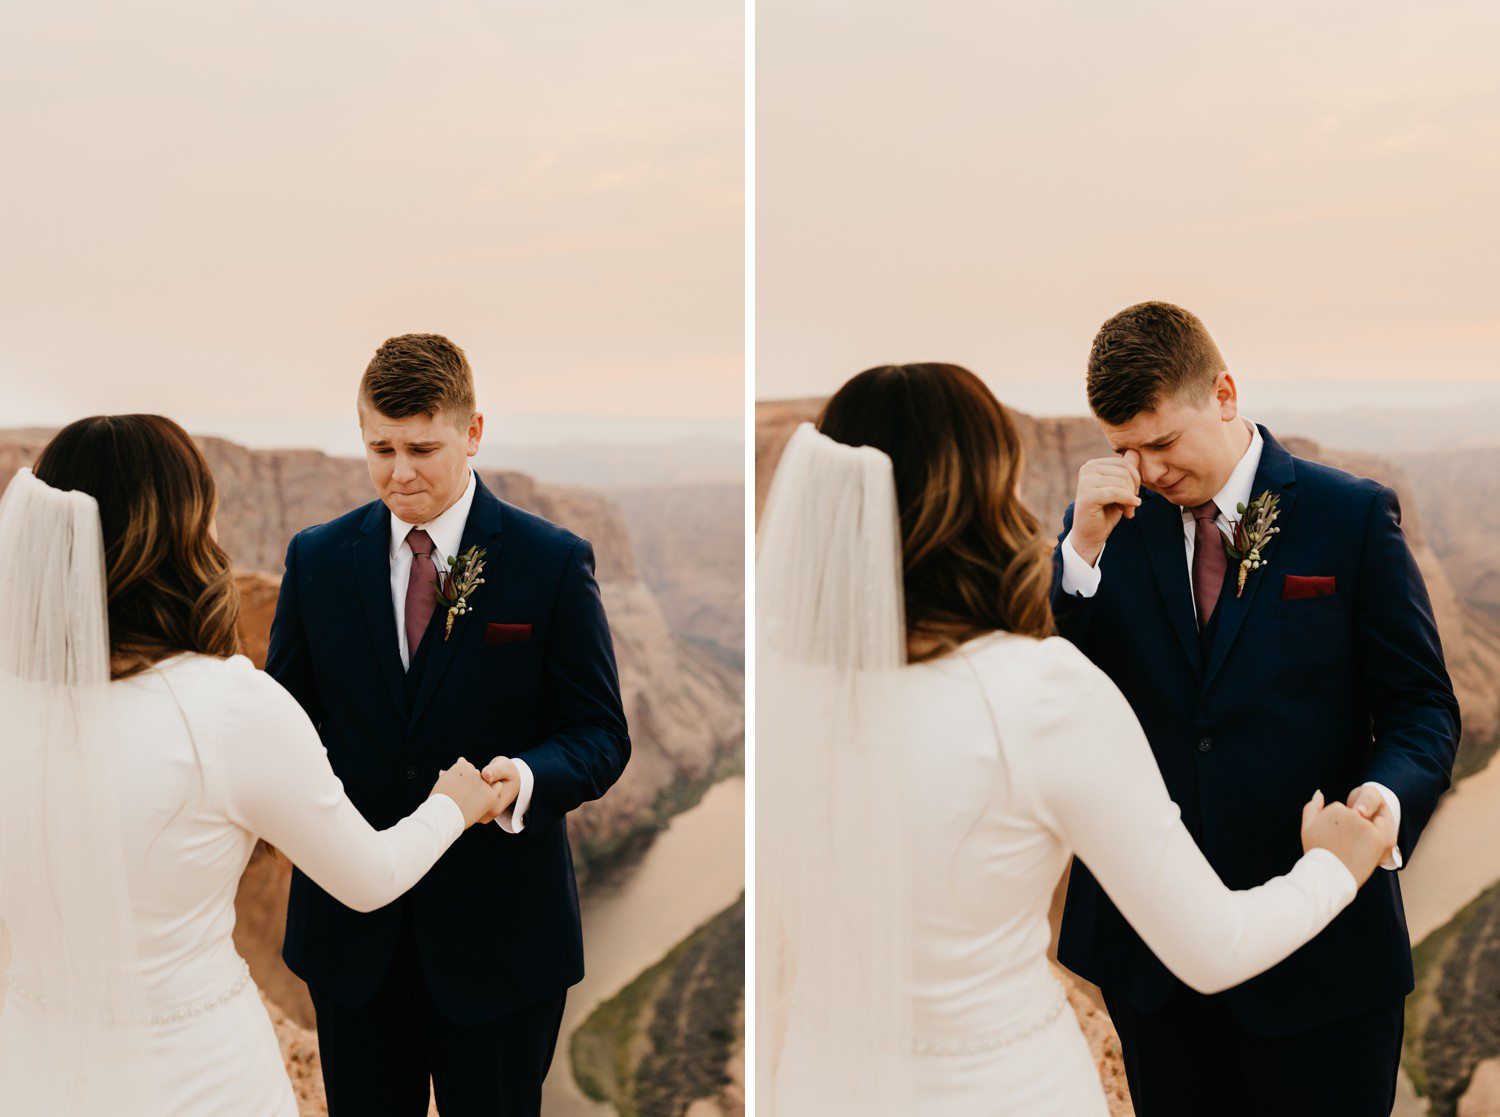 Wedding First Look at Horseshoe Bend